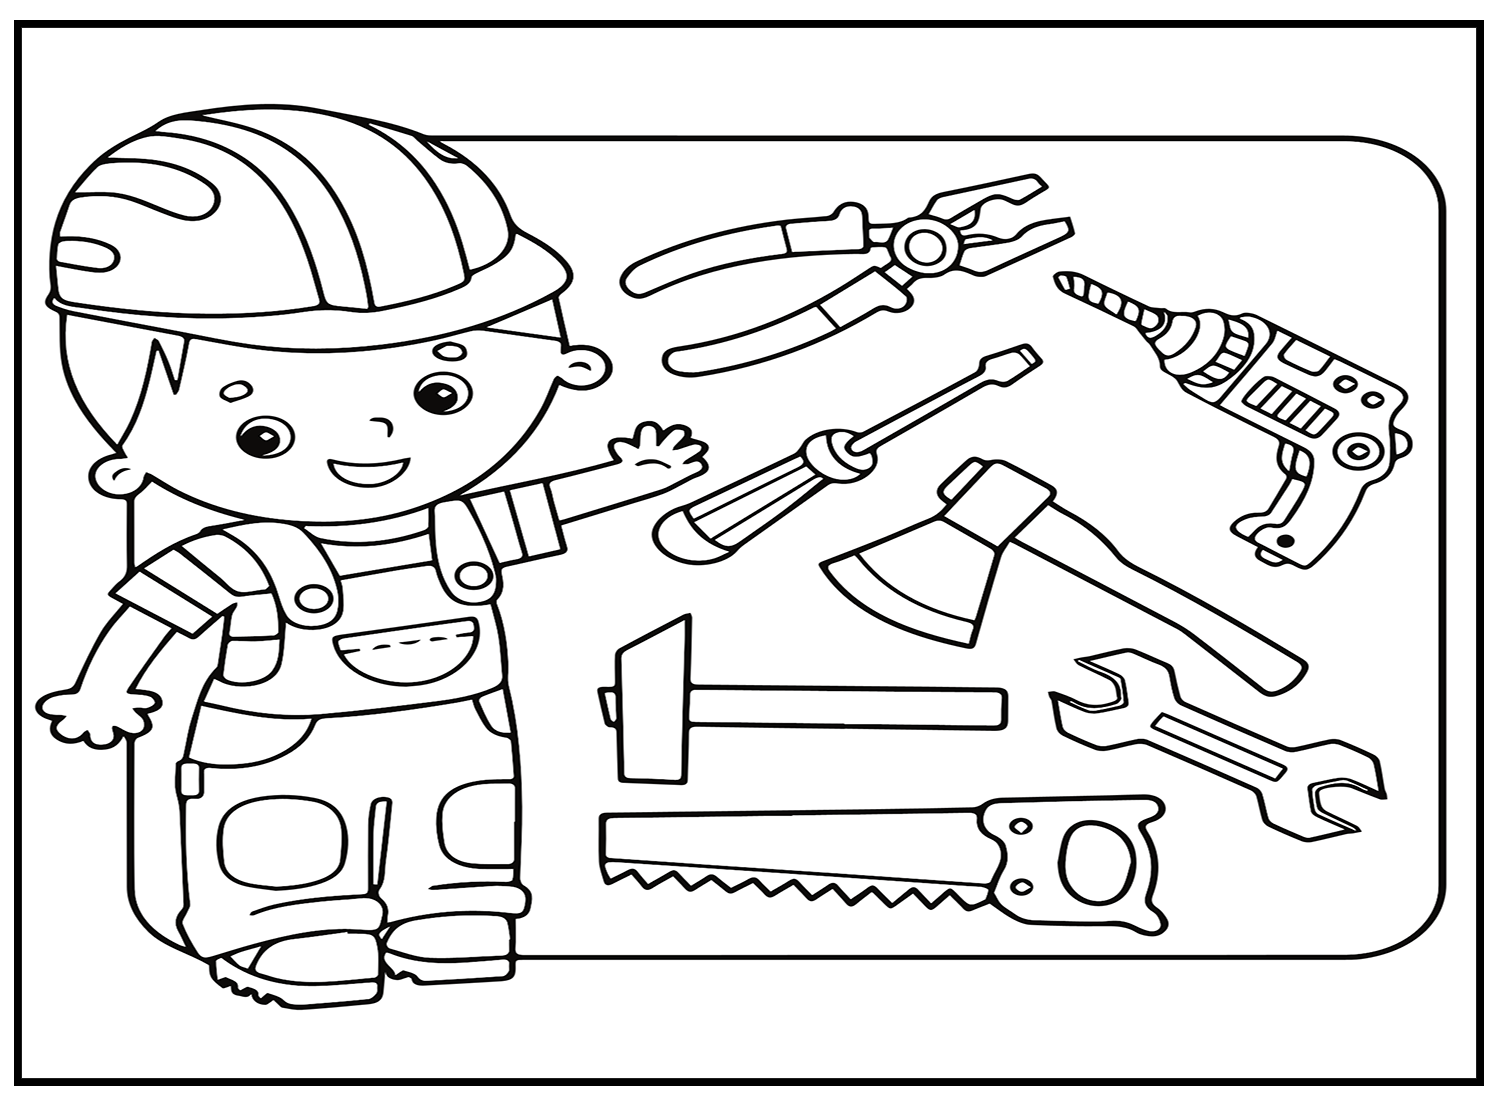 Technician And Wrench Coloring Pages